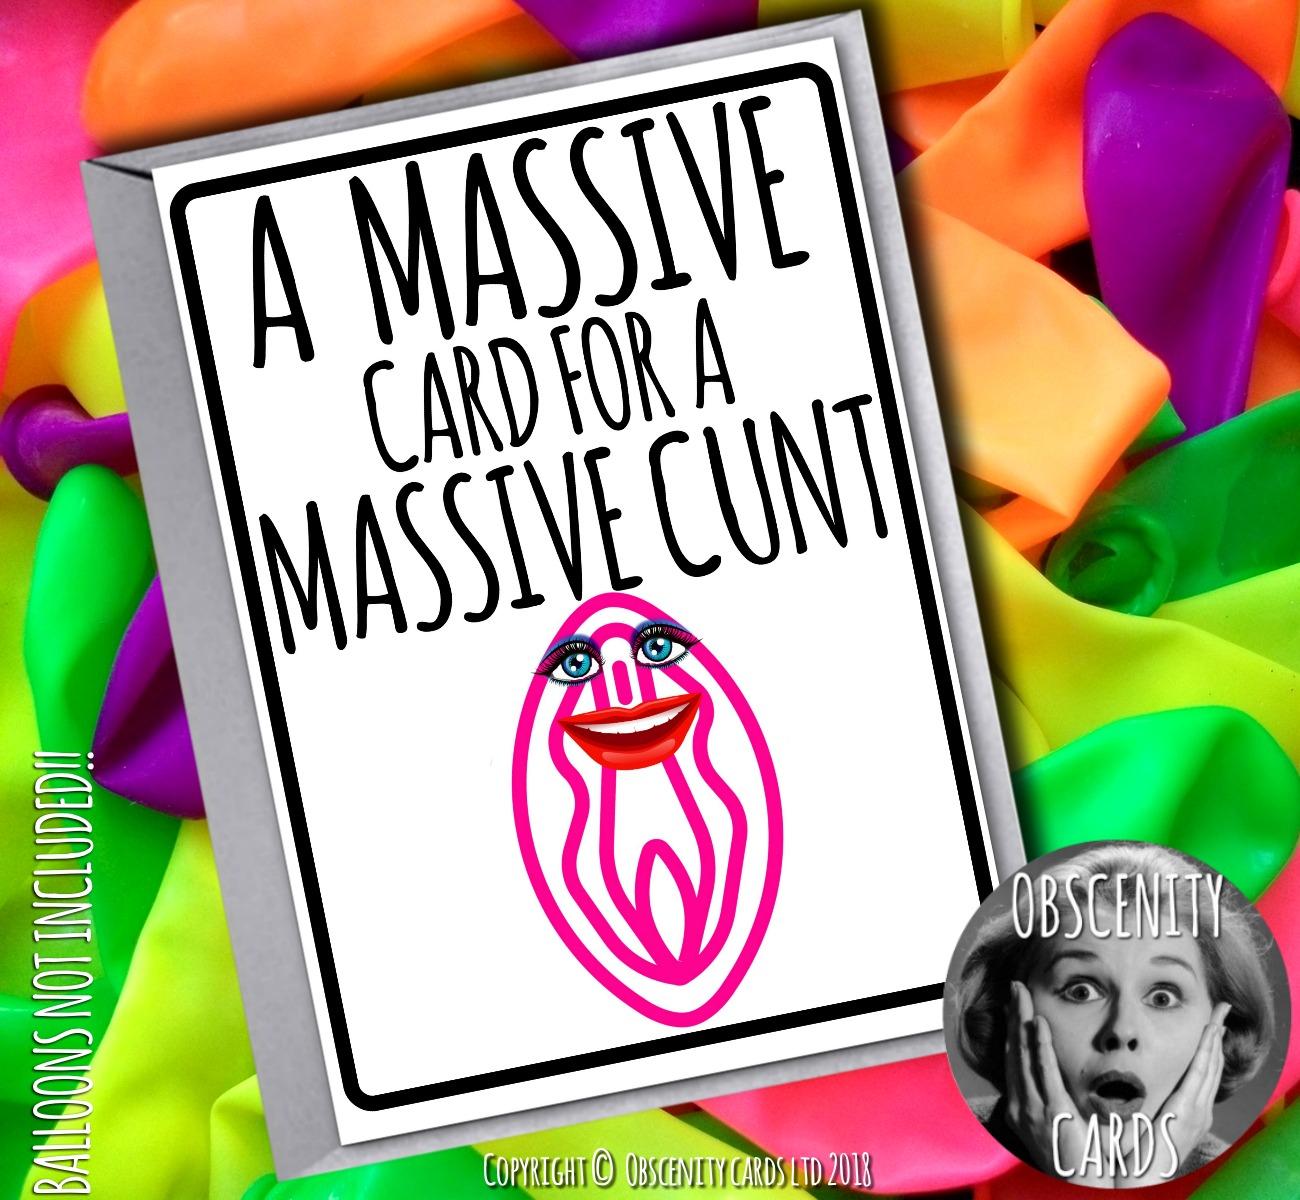 Obscene funny offensive birthday cards by Obscenity cards. Obscene Funny Cards, Pens, Party Hats, Key rings, Magnets, Lighters & Loads More!